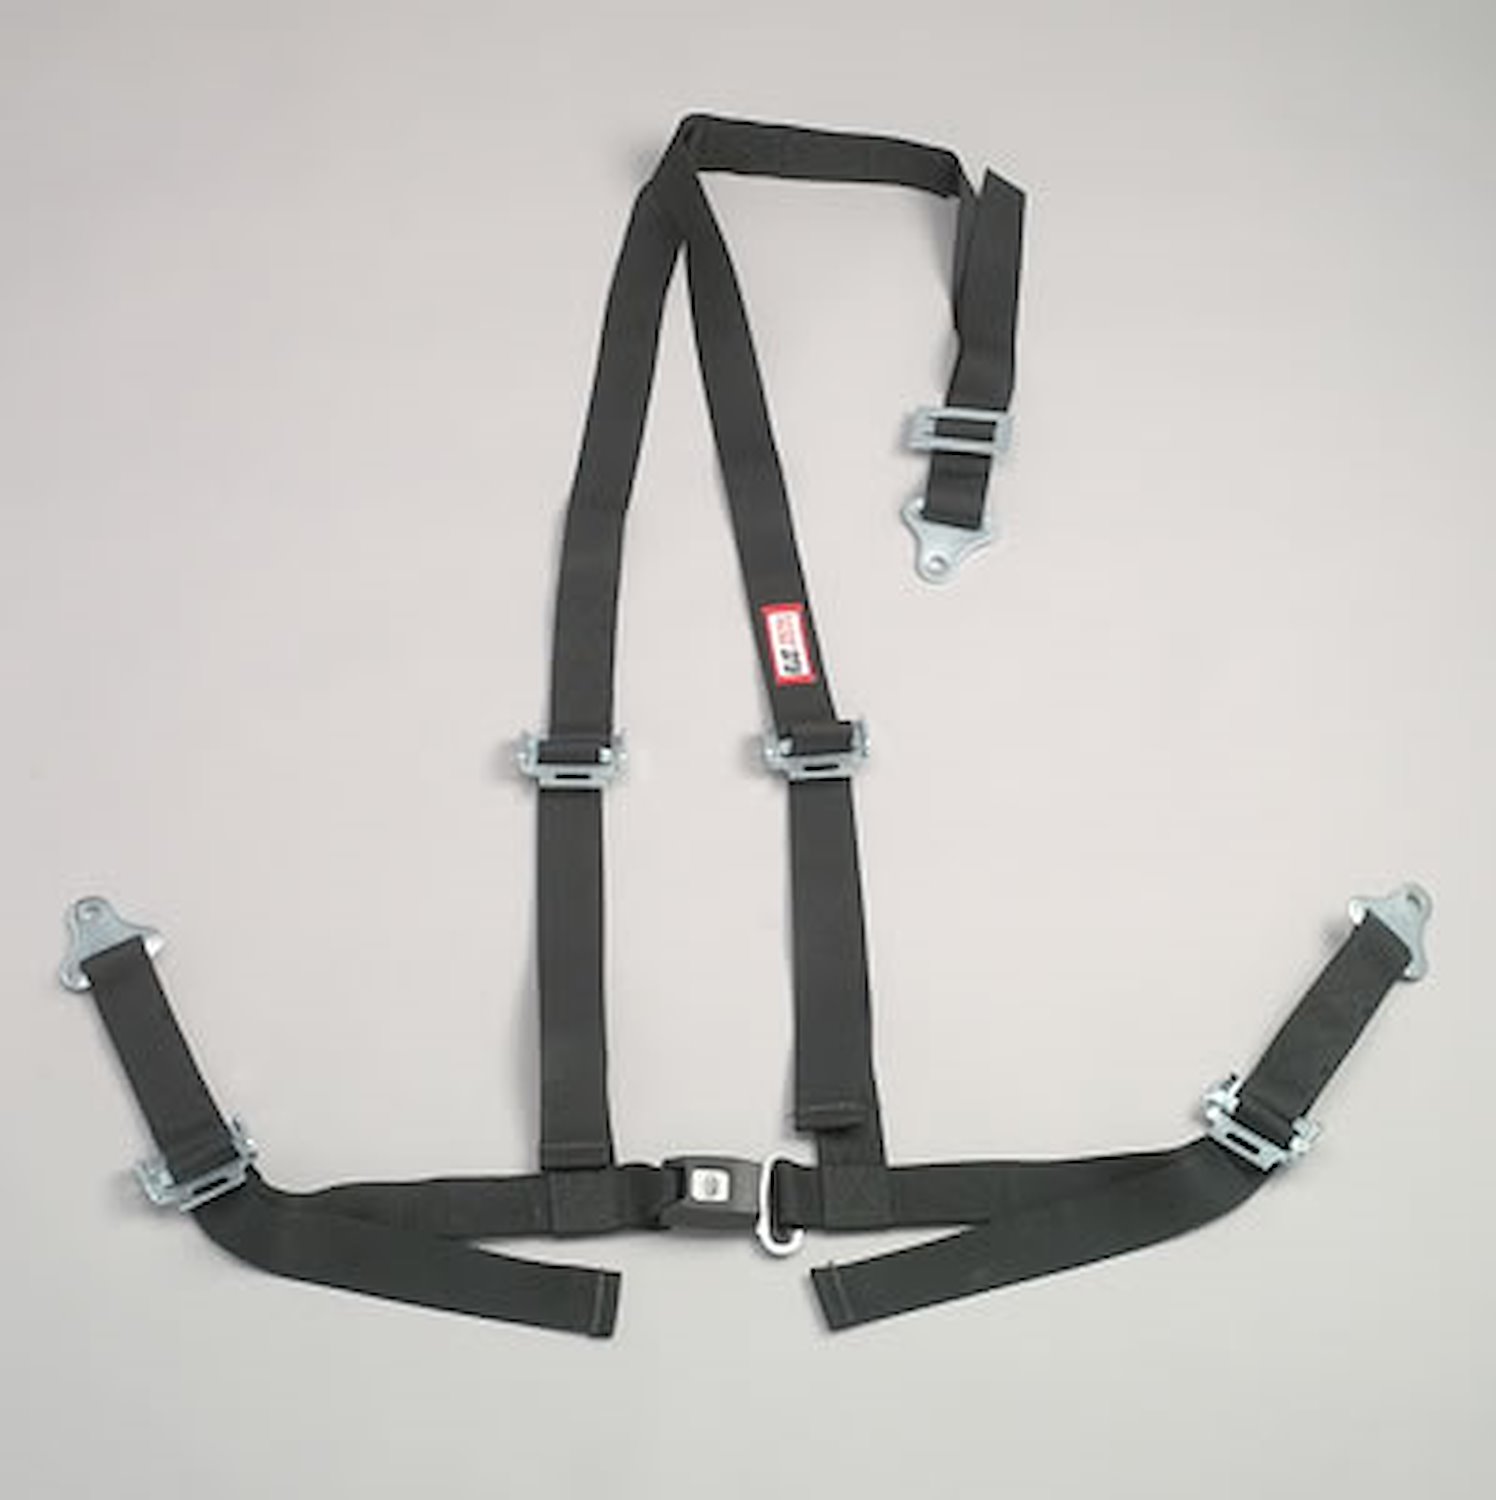 NON-SFI B&T HARNESS 2 PULL DOWN Lap Belt 2 S.H. INDIVIDUAL FLOOR Mount ALL WRAP ENDS YELLOW